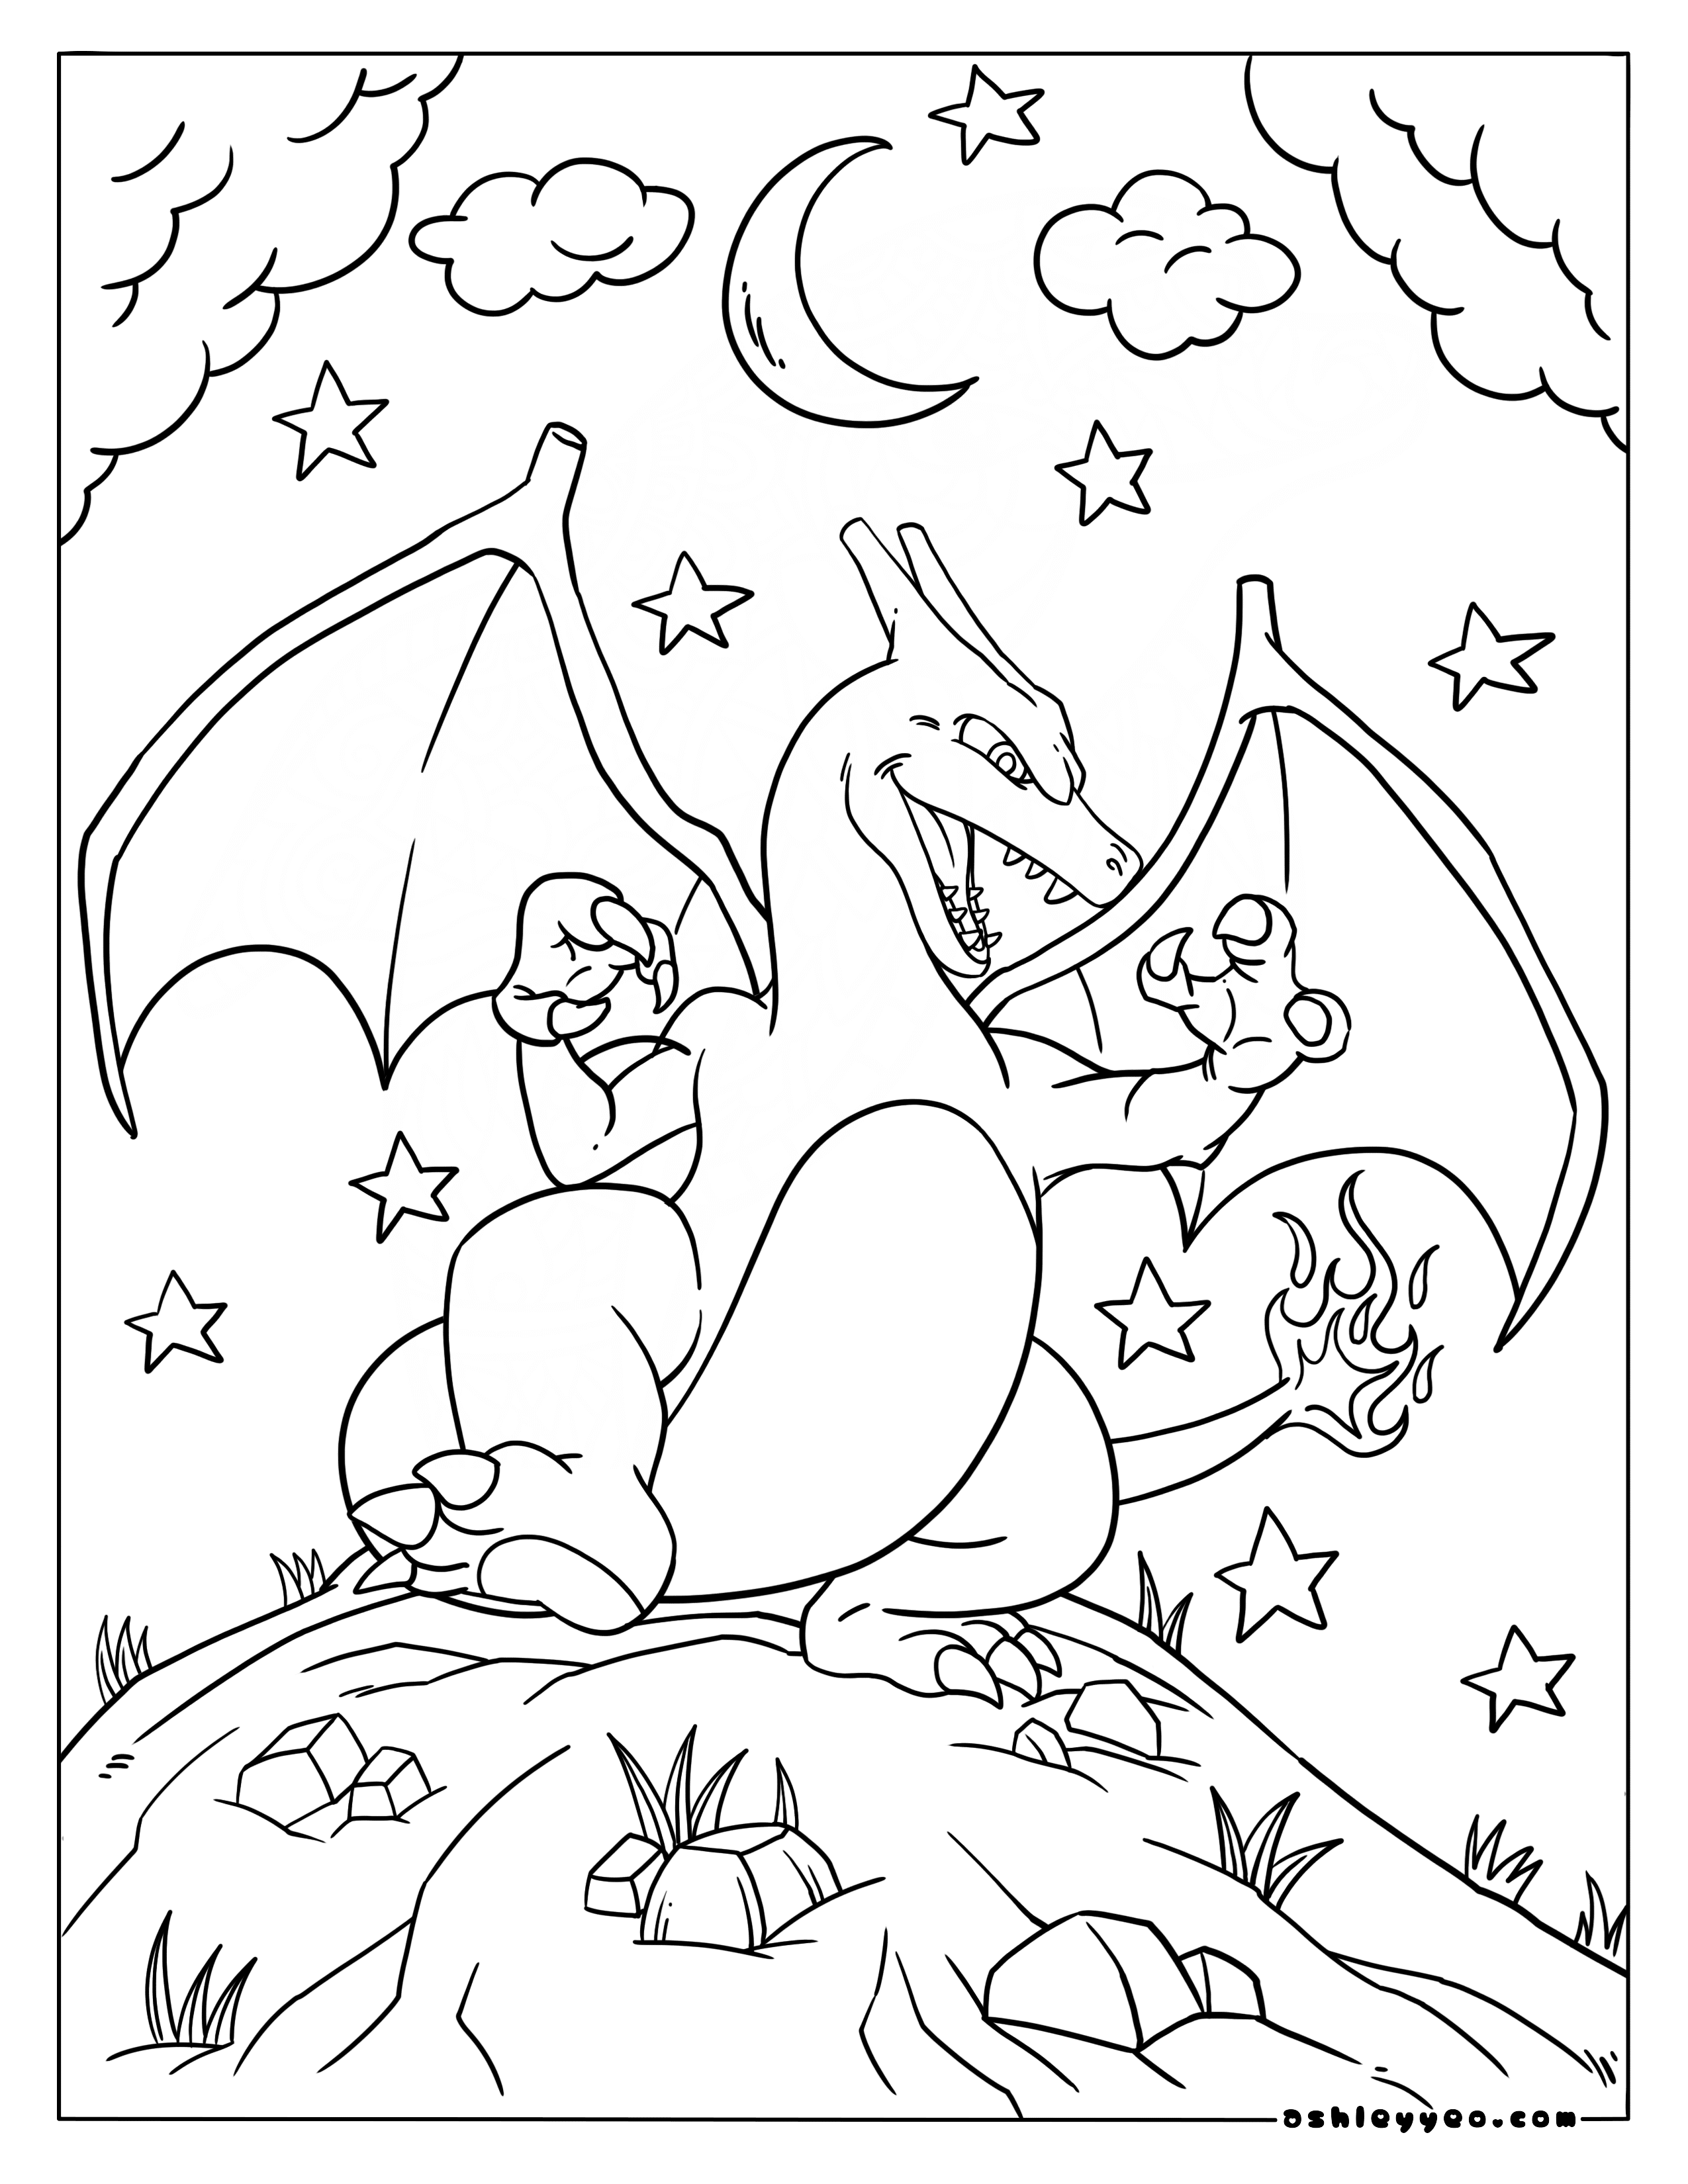 Free pokemon coloring pages charizard for kids